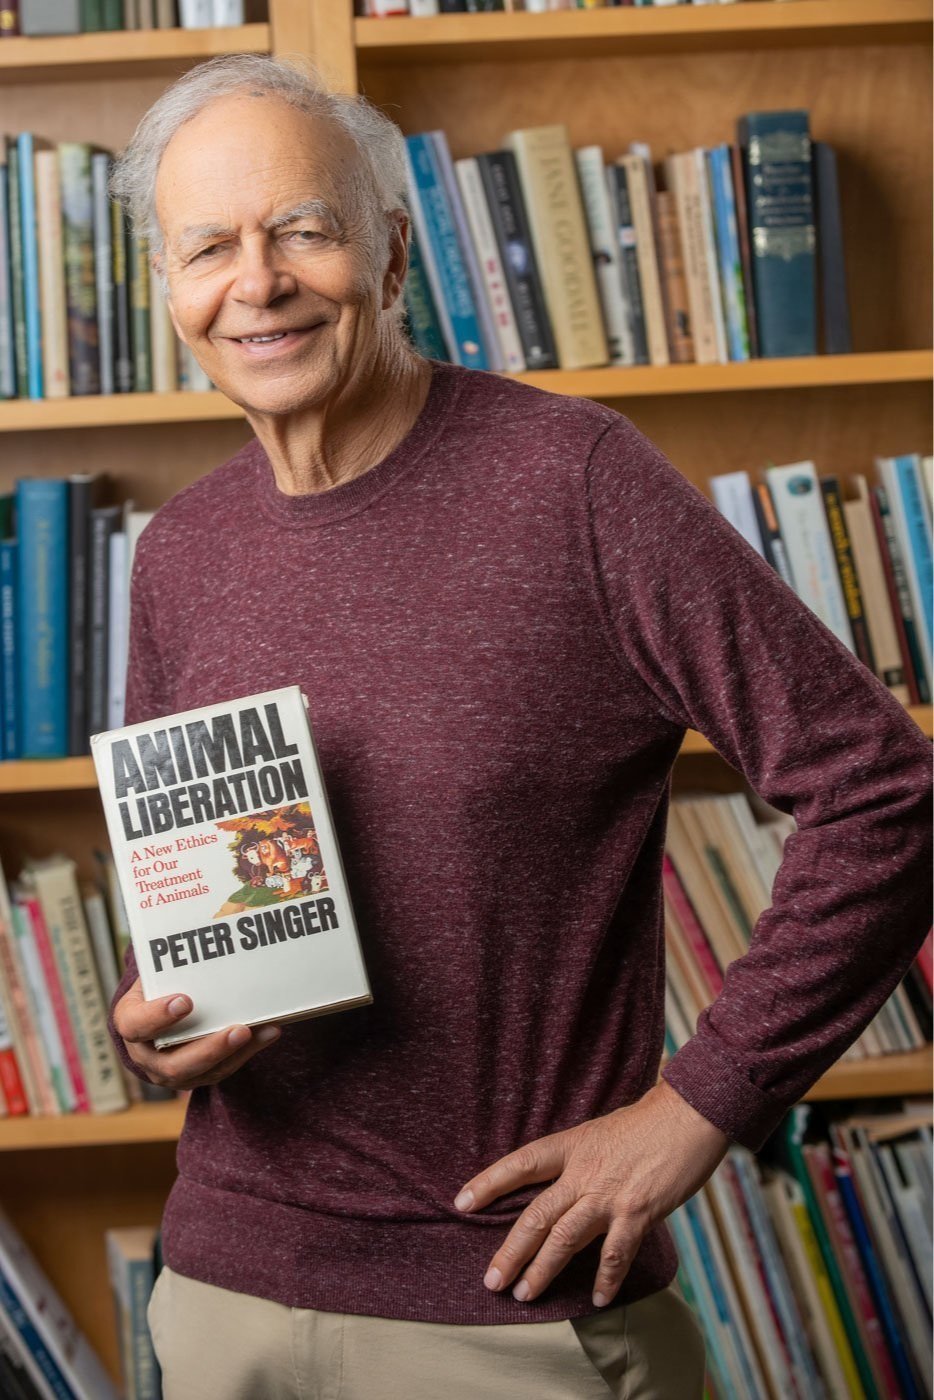 Peter Singer holding a copy of his book Animal Liberation